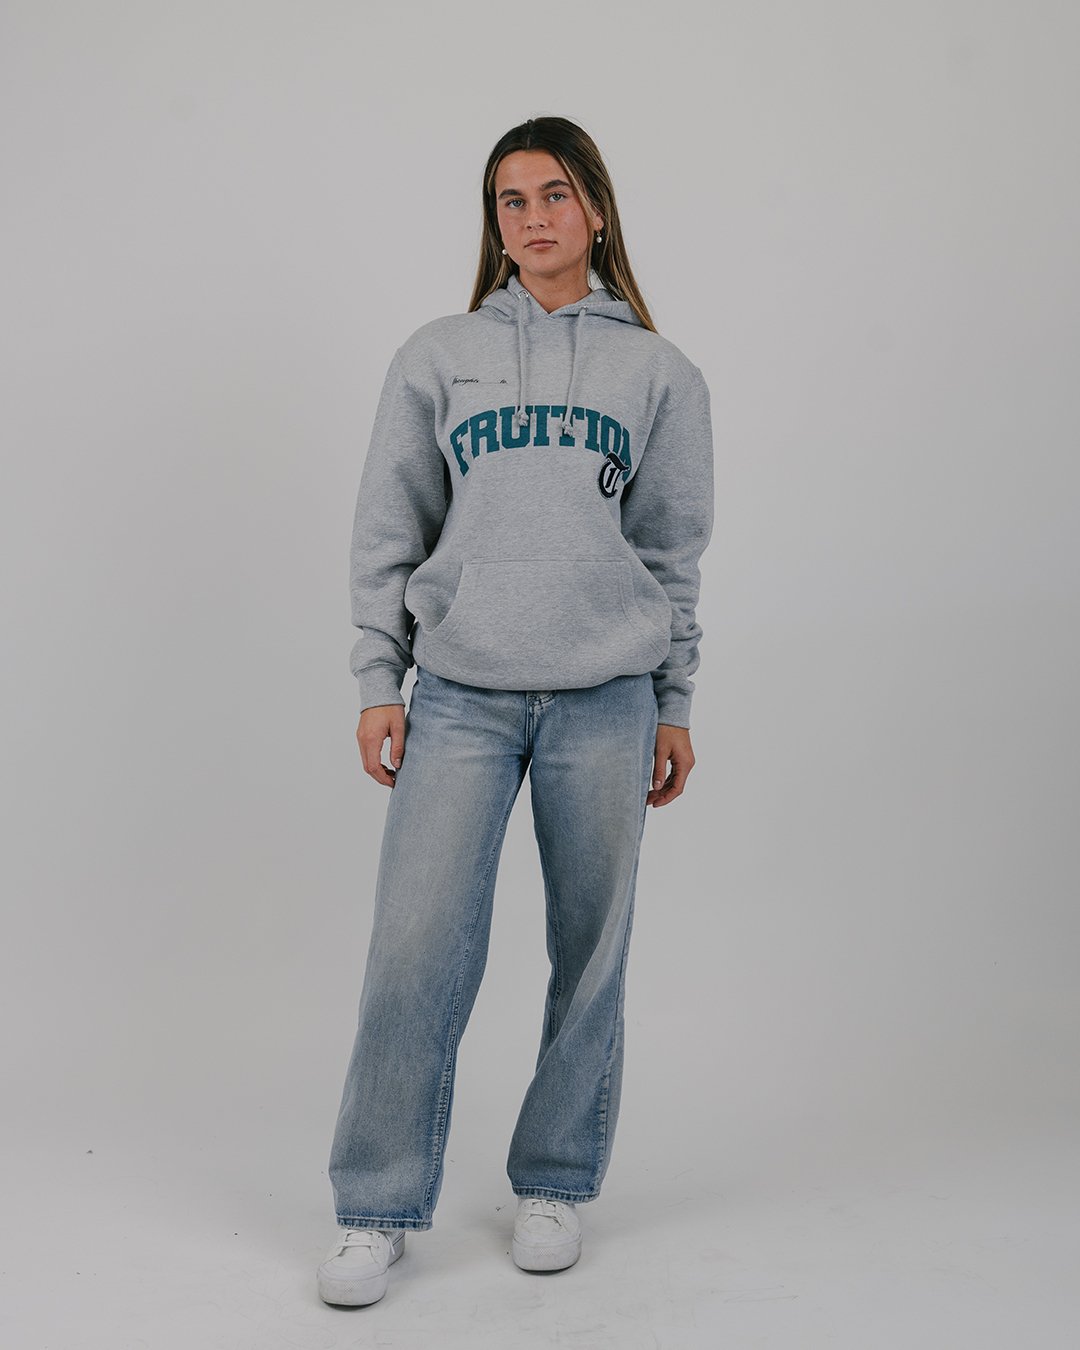 Fruition Applique Grey Hoodie - trainofthoughtcollective